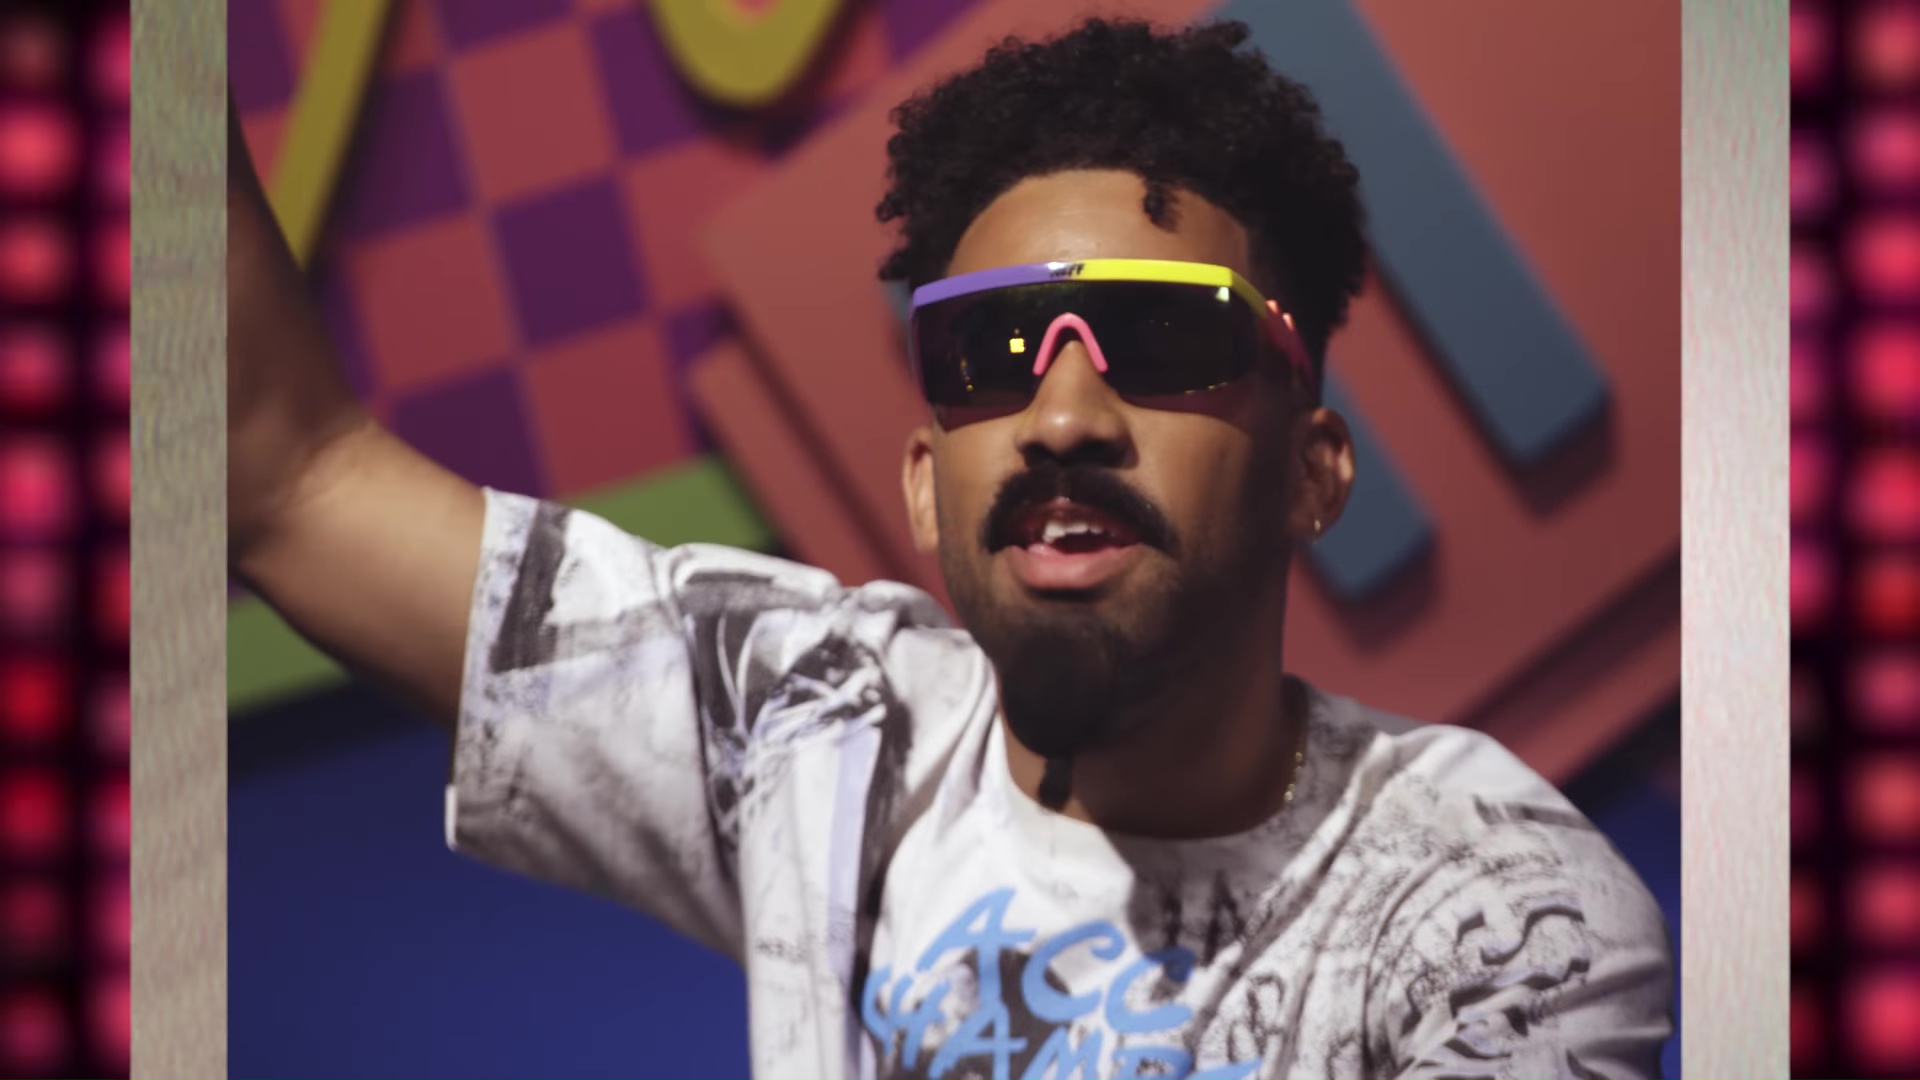 Neff Sunglasses Worn By KYLE In Playinwitme (2018)